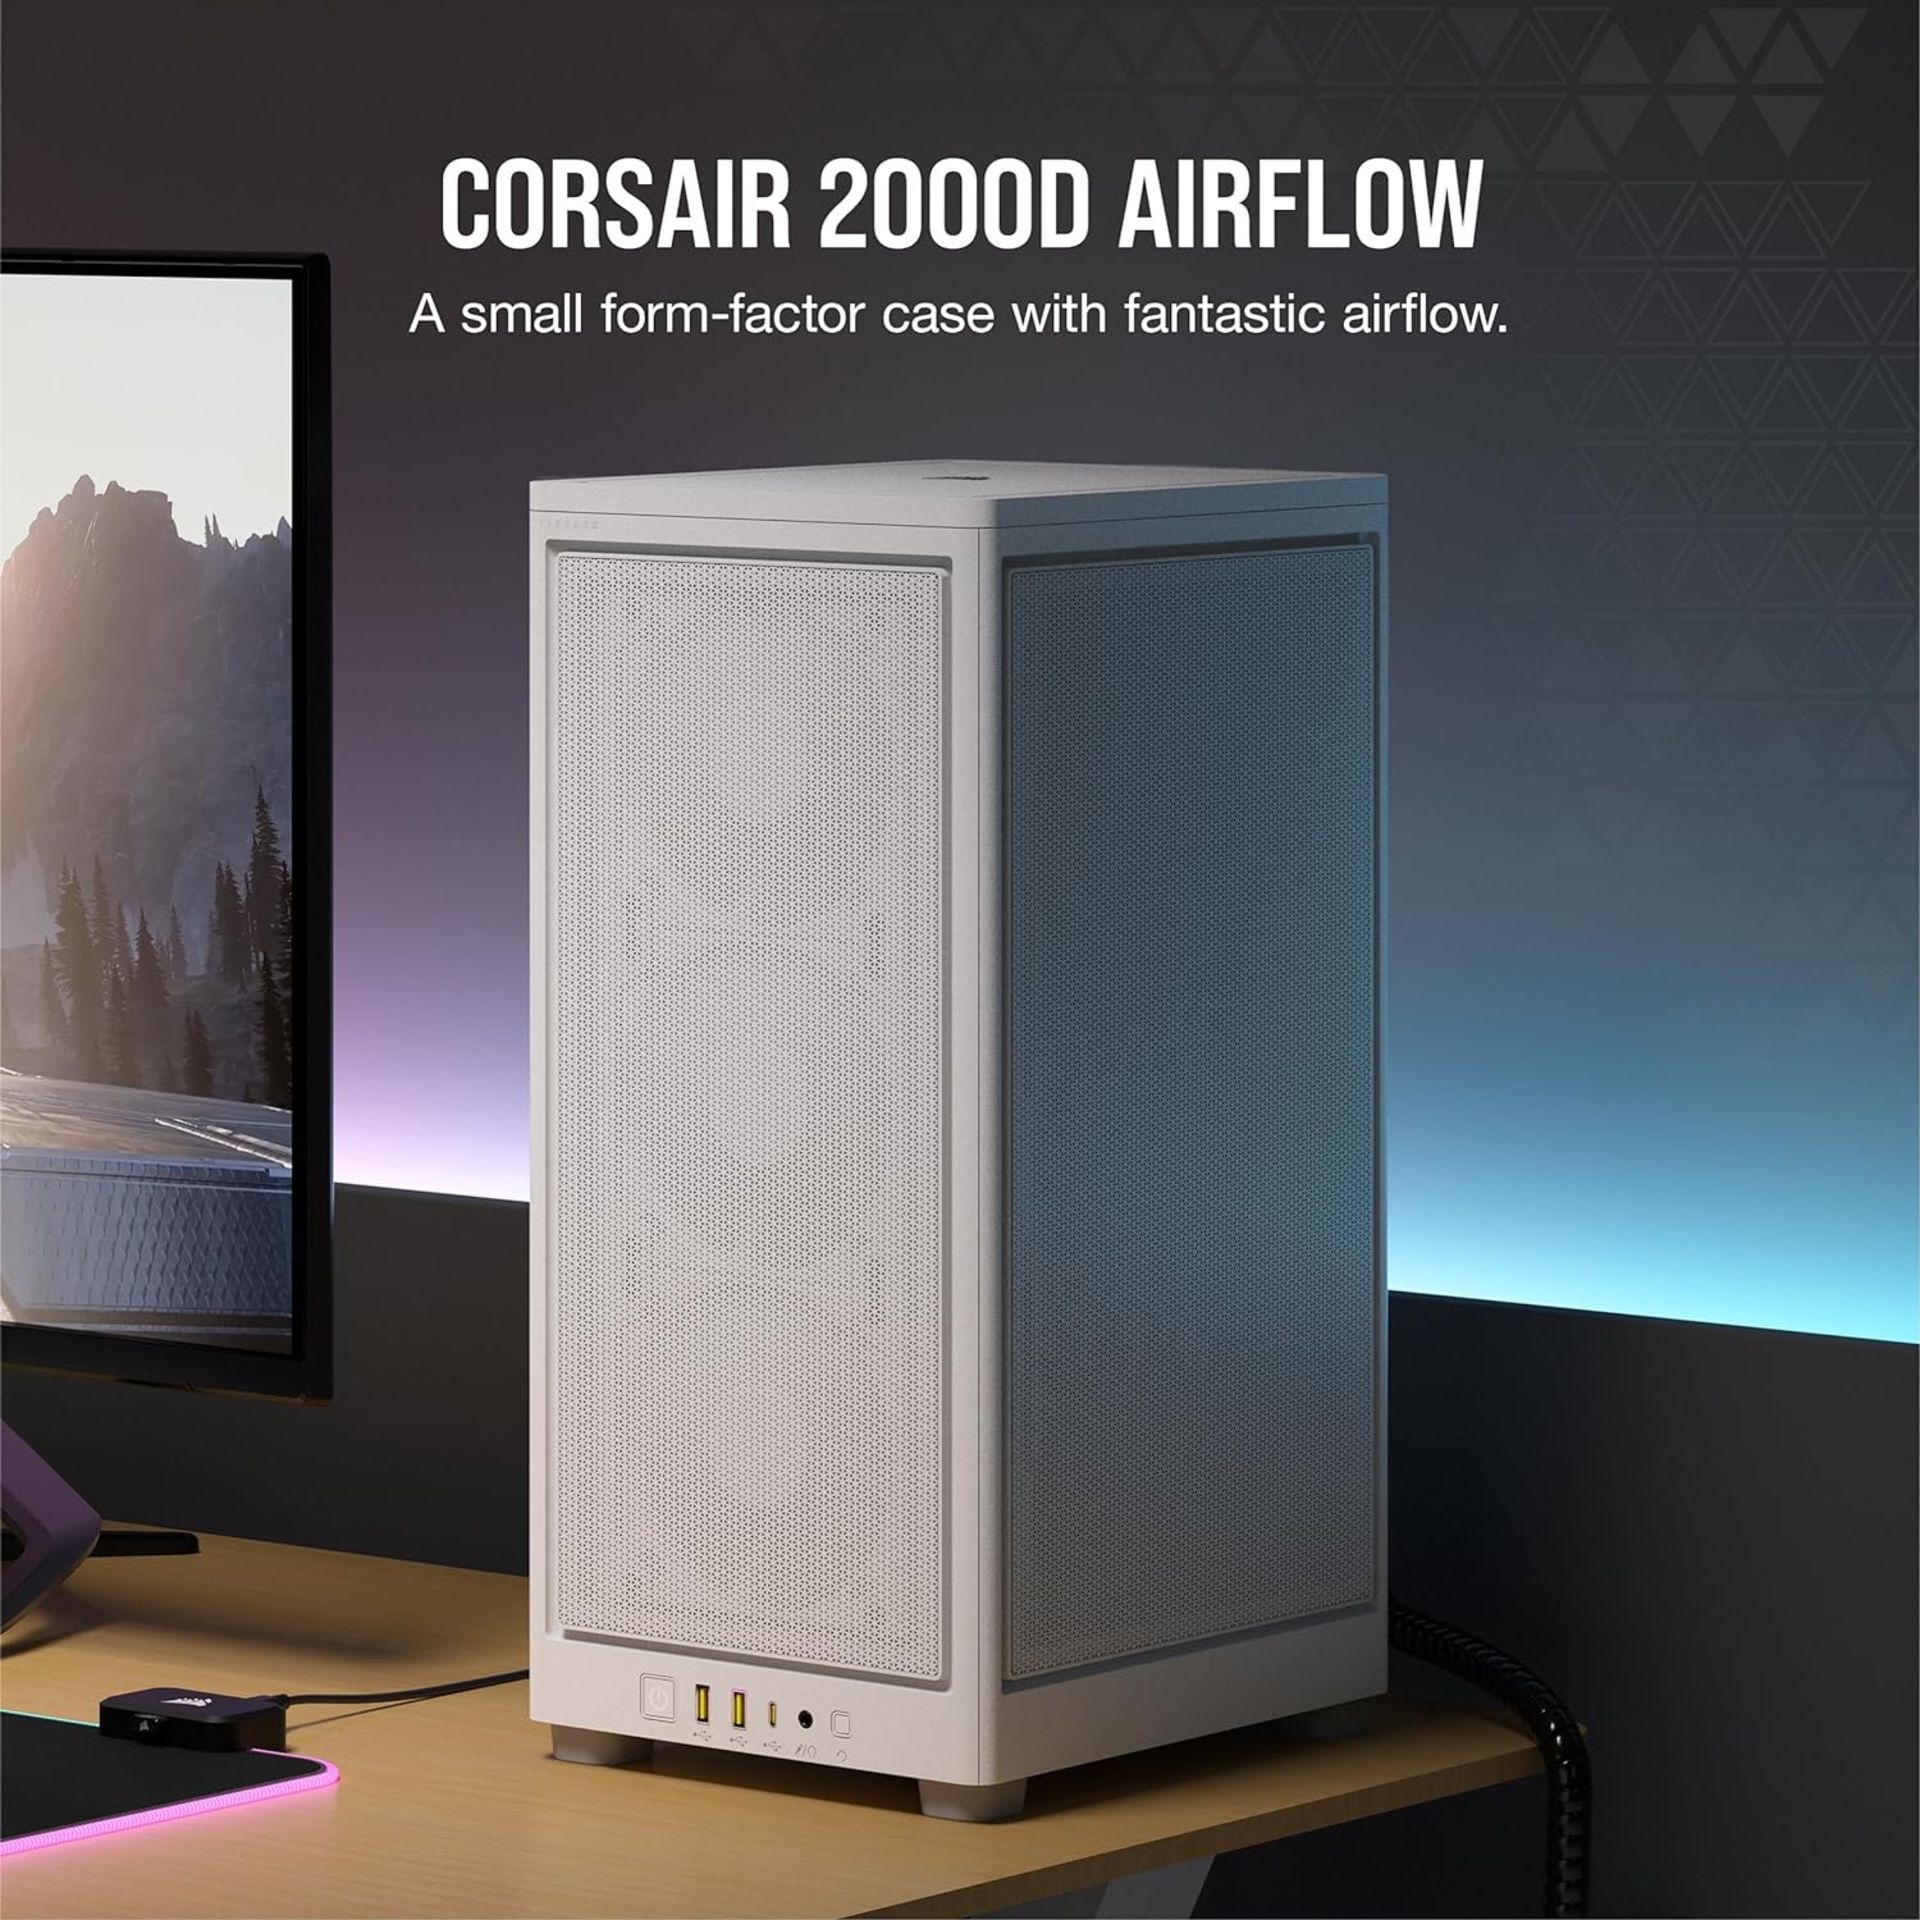 NEW & BOXED CORSAIR 2000D Airflow Mini-ITX PC Case - WHITE. RRP £99.99. (R15R). A Fitting Choice: - Image 2 of 7